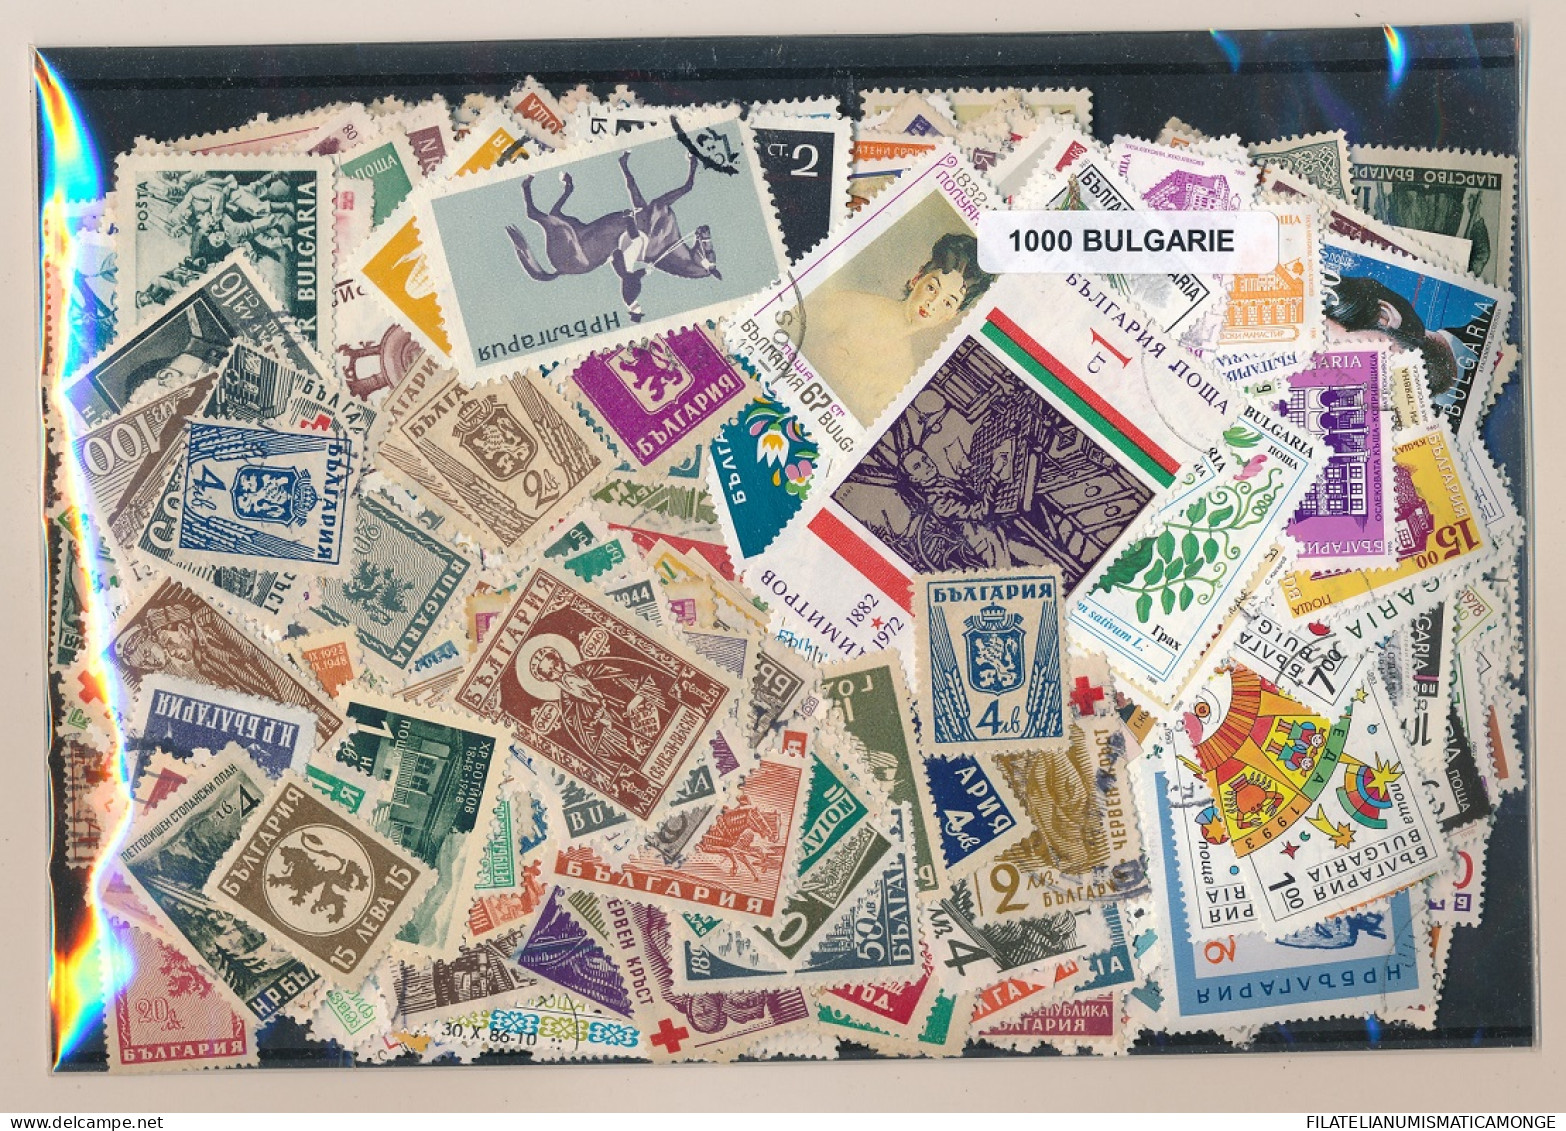  Offer - Lot Stamps - Paqueteria  Bulgaria 1000 Sellos Diferentes           - Lots & Kiloware (mixtures) - Min. 1000 Stamps